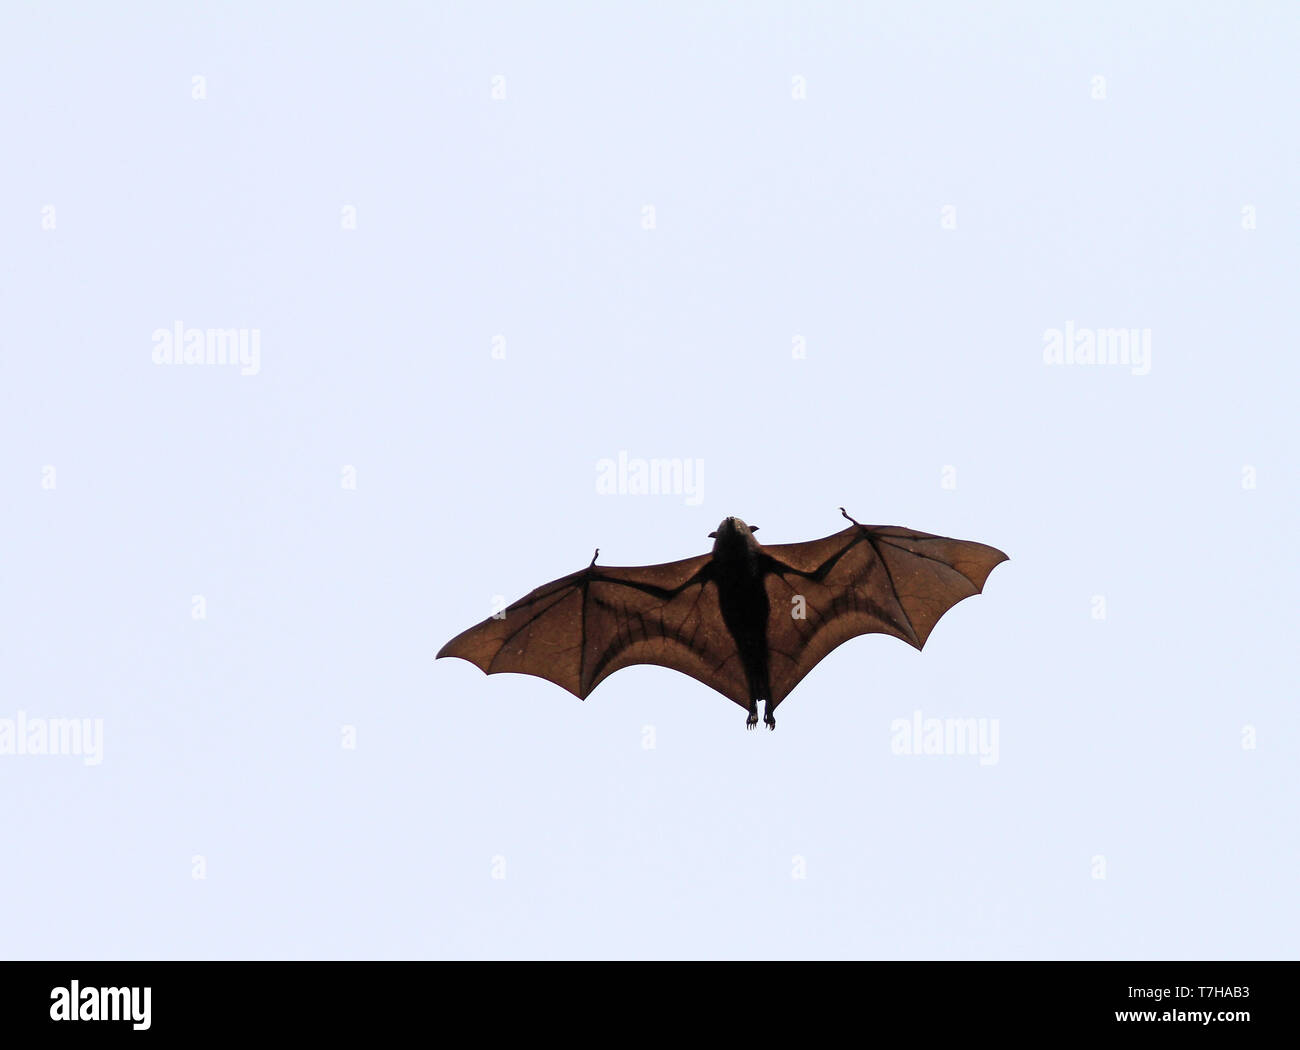 Large flying fox (Pteropus vampyrus in flight over Sumatra. One of the largest species of bats in the world. Stock Photo